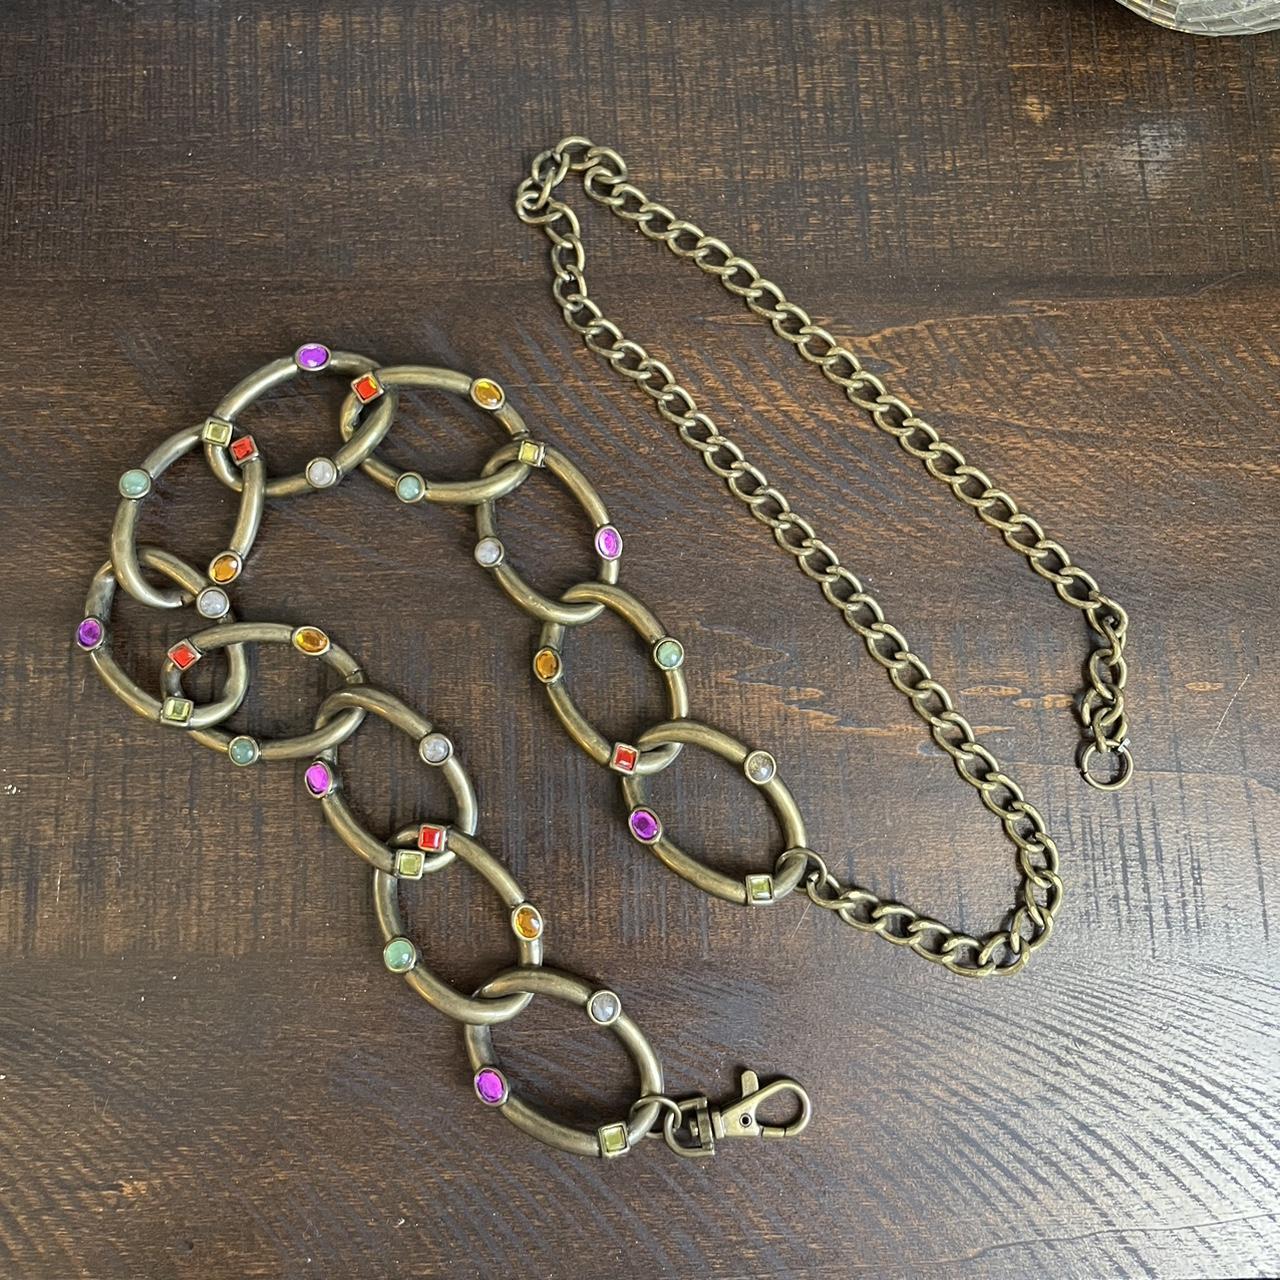 Brass chain link belt with colorful gems